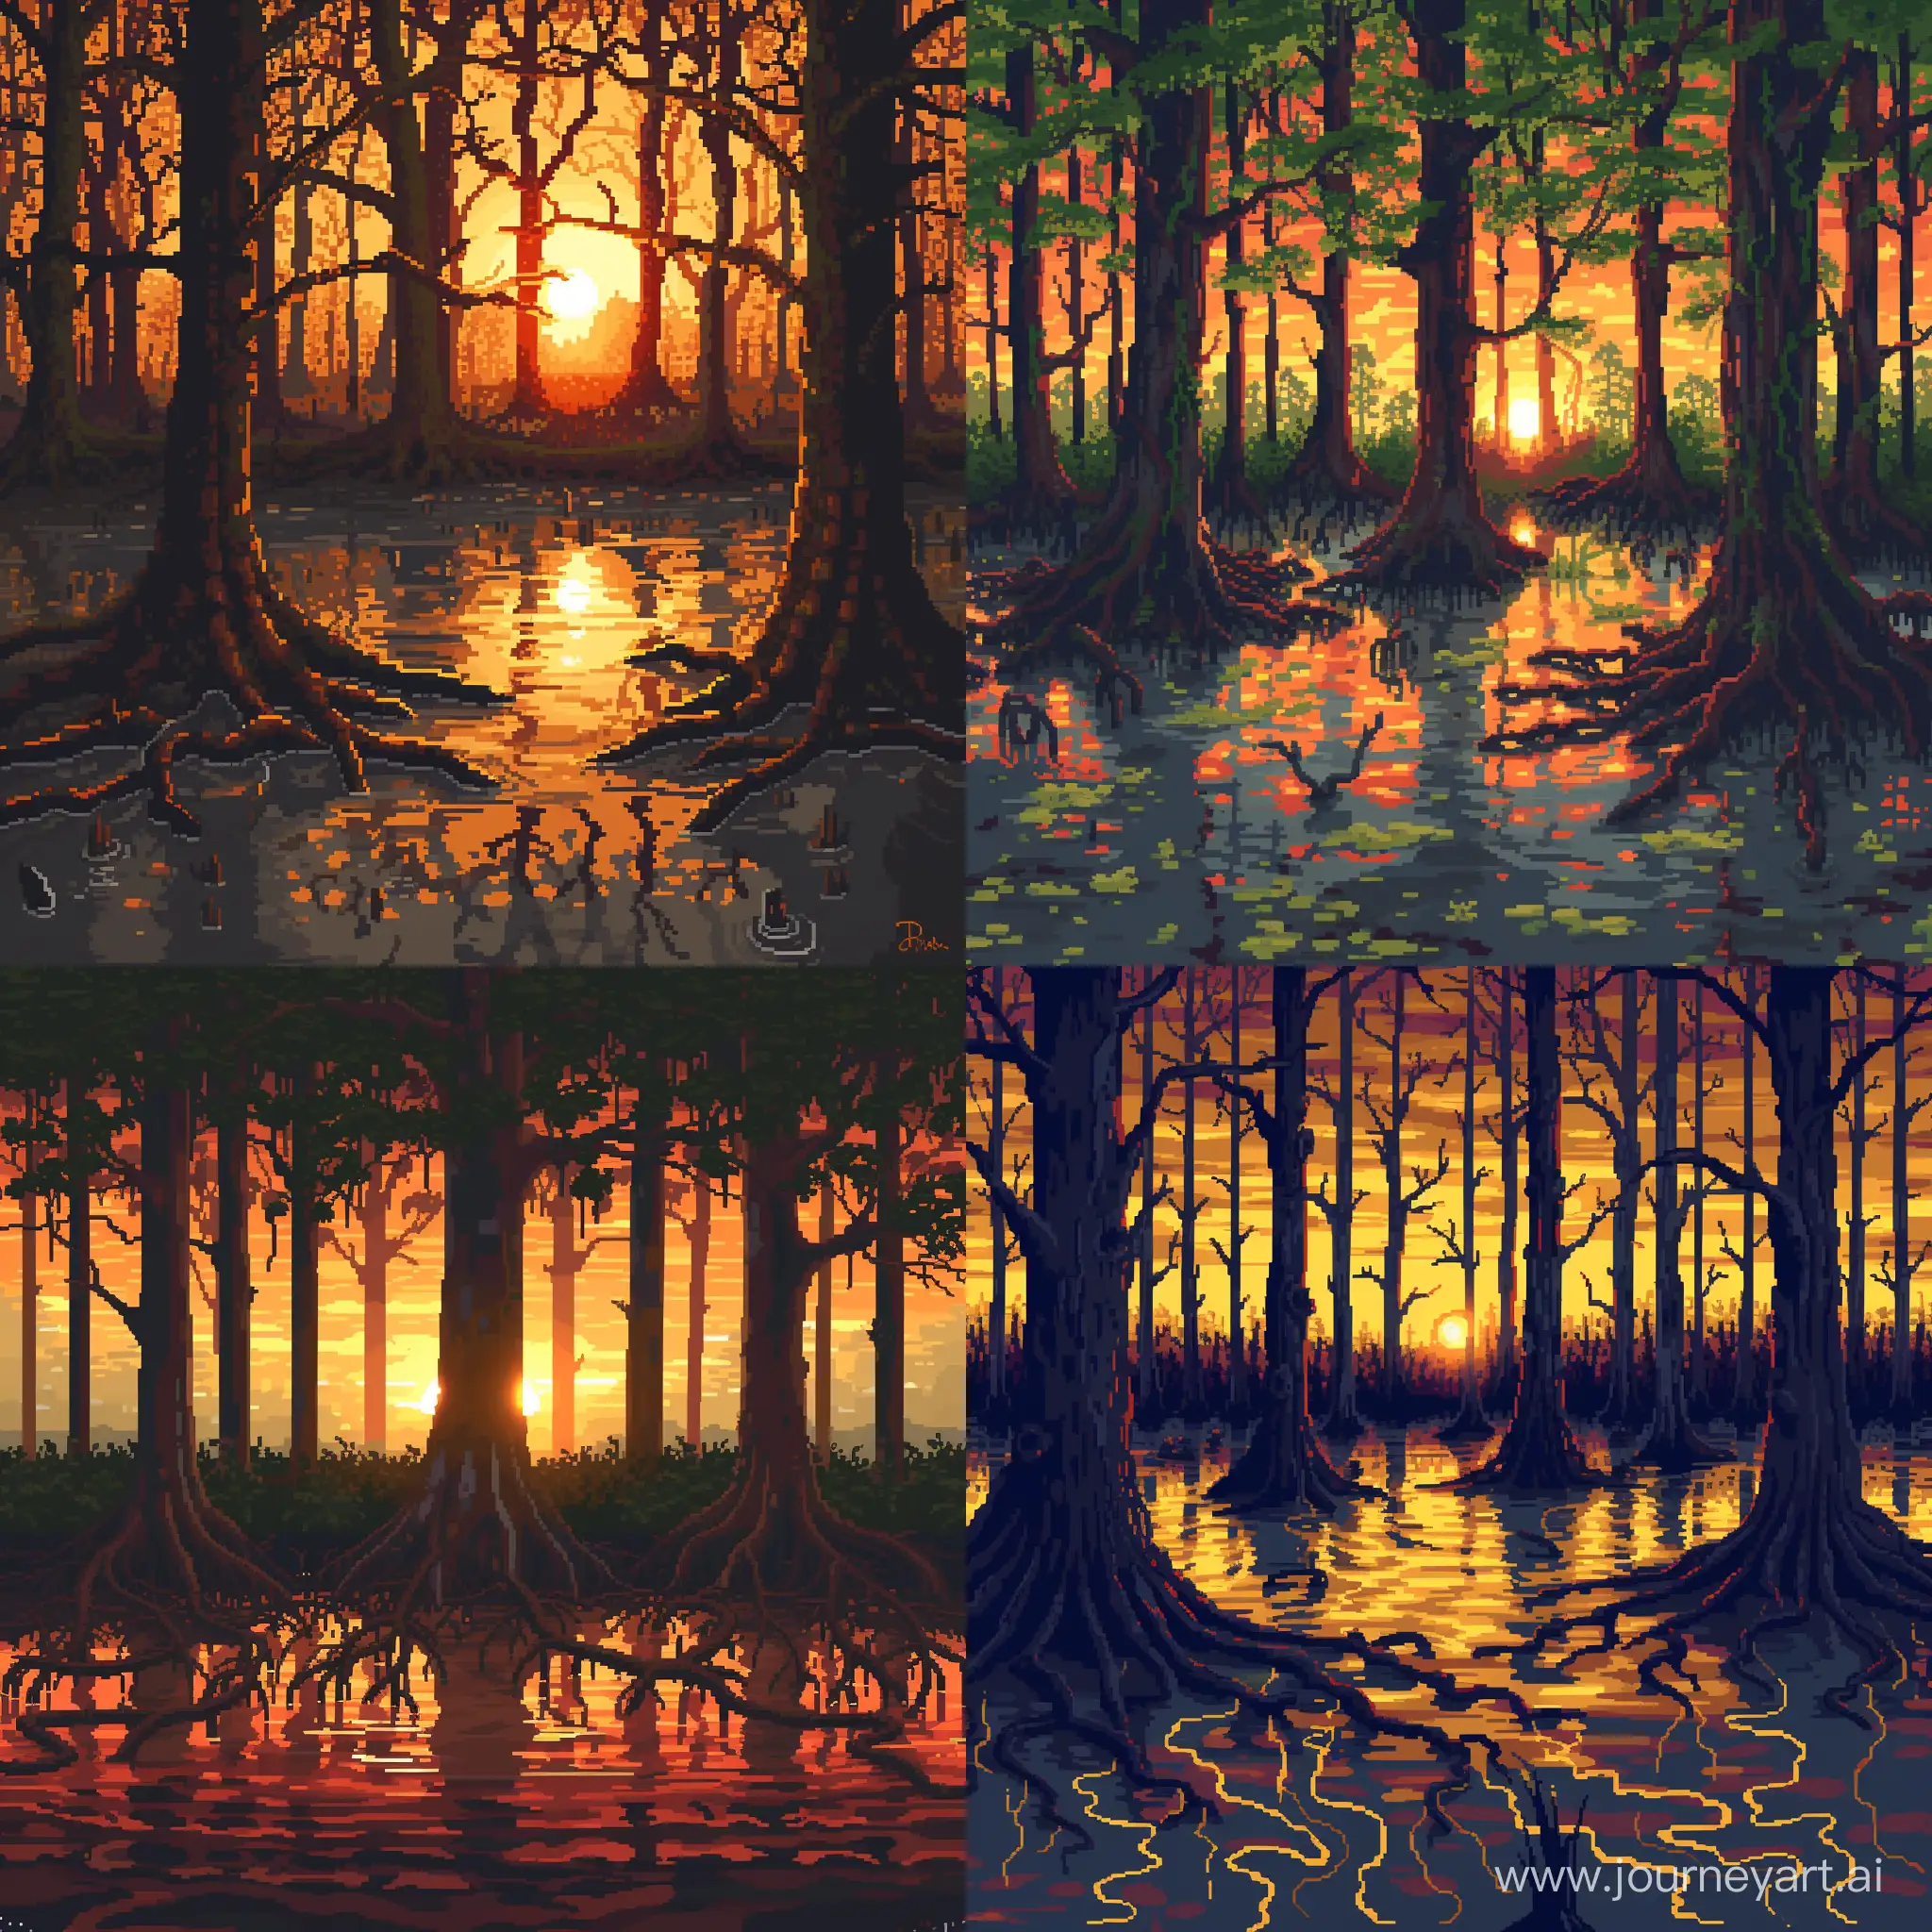 Sunset-Pixel-Art-of-Submerged-Tree-Roots-in-a-Swamp-Forest